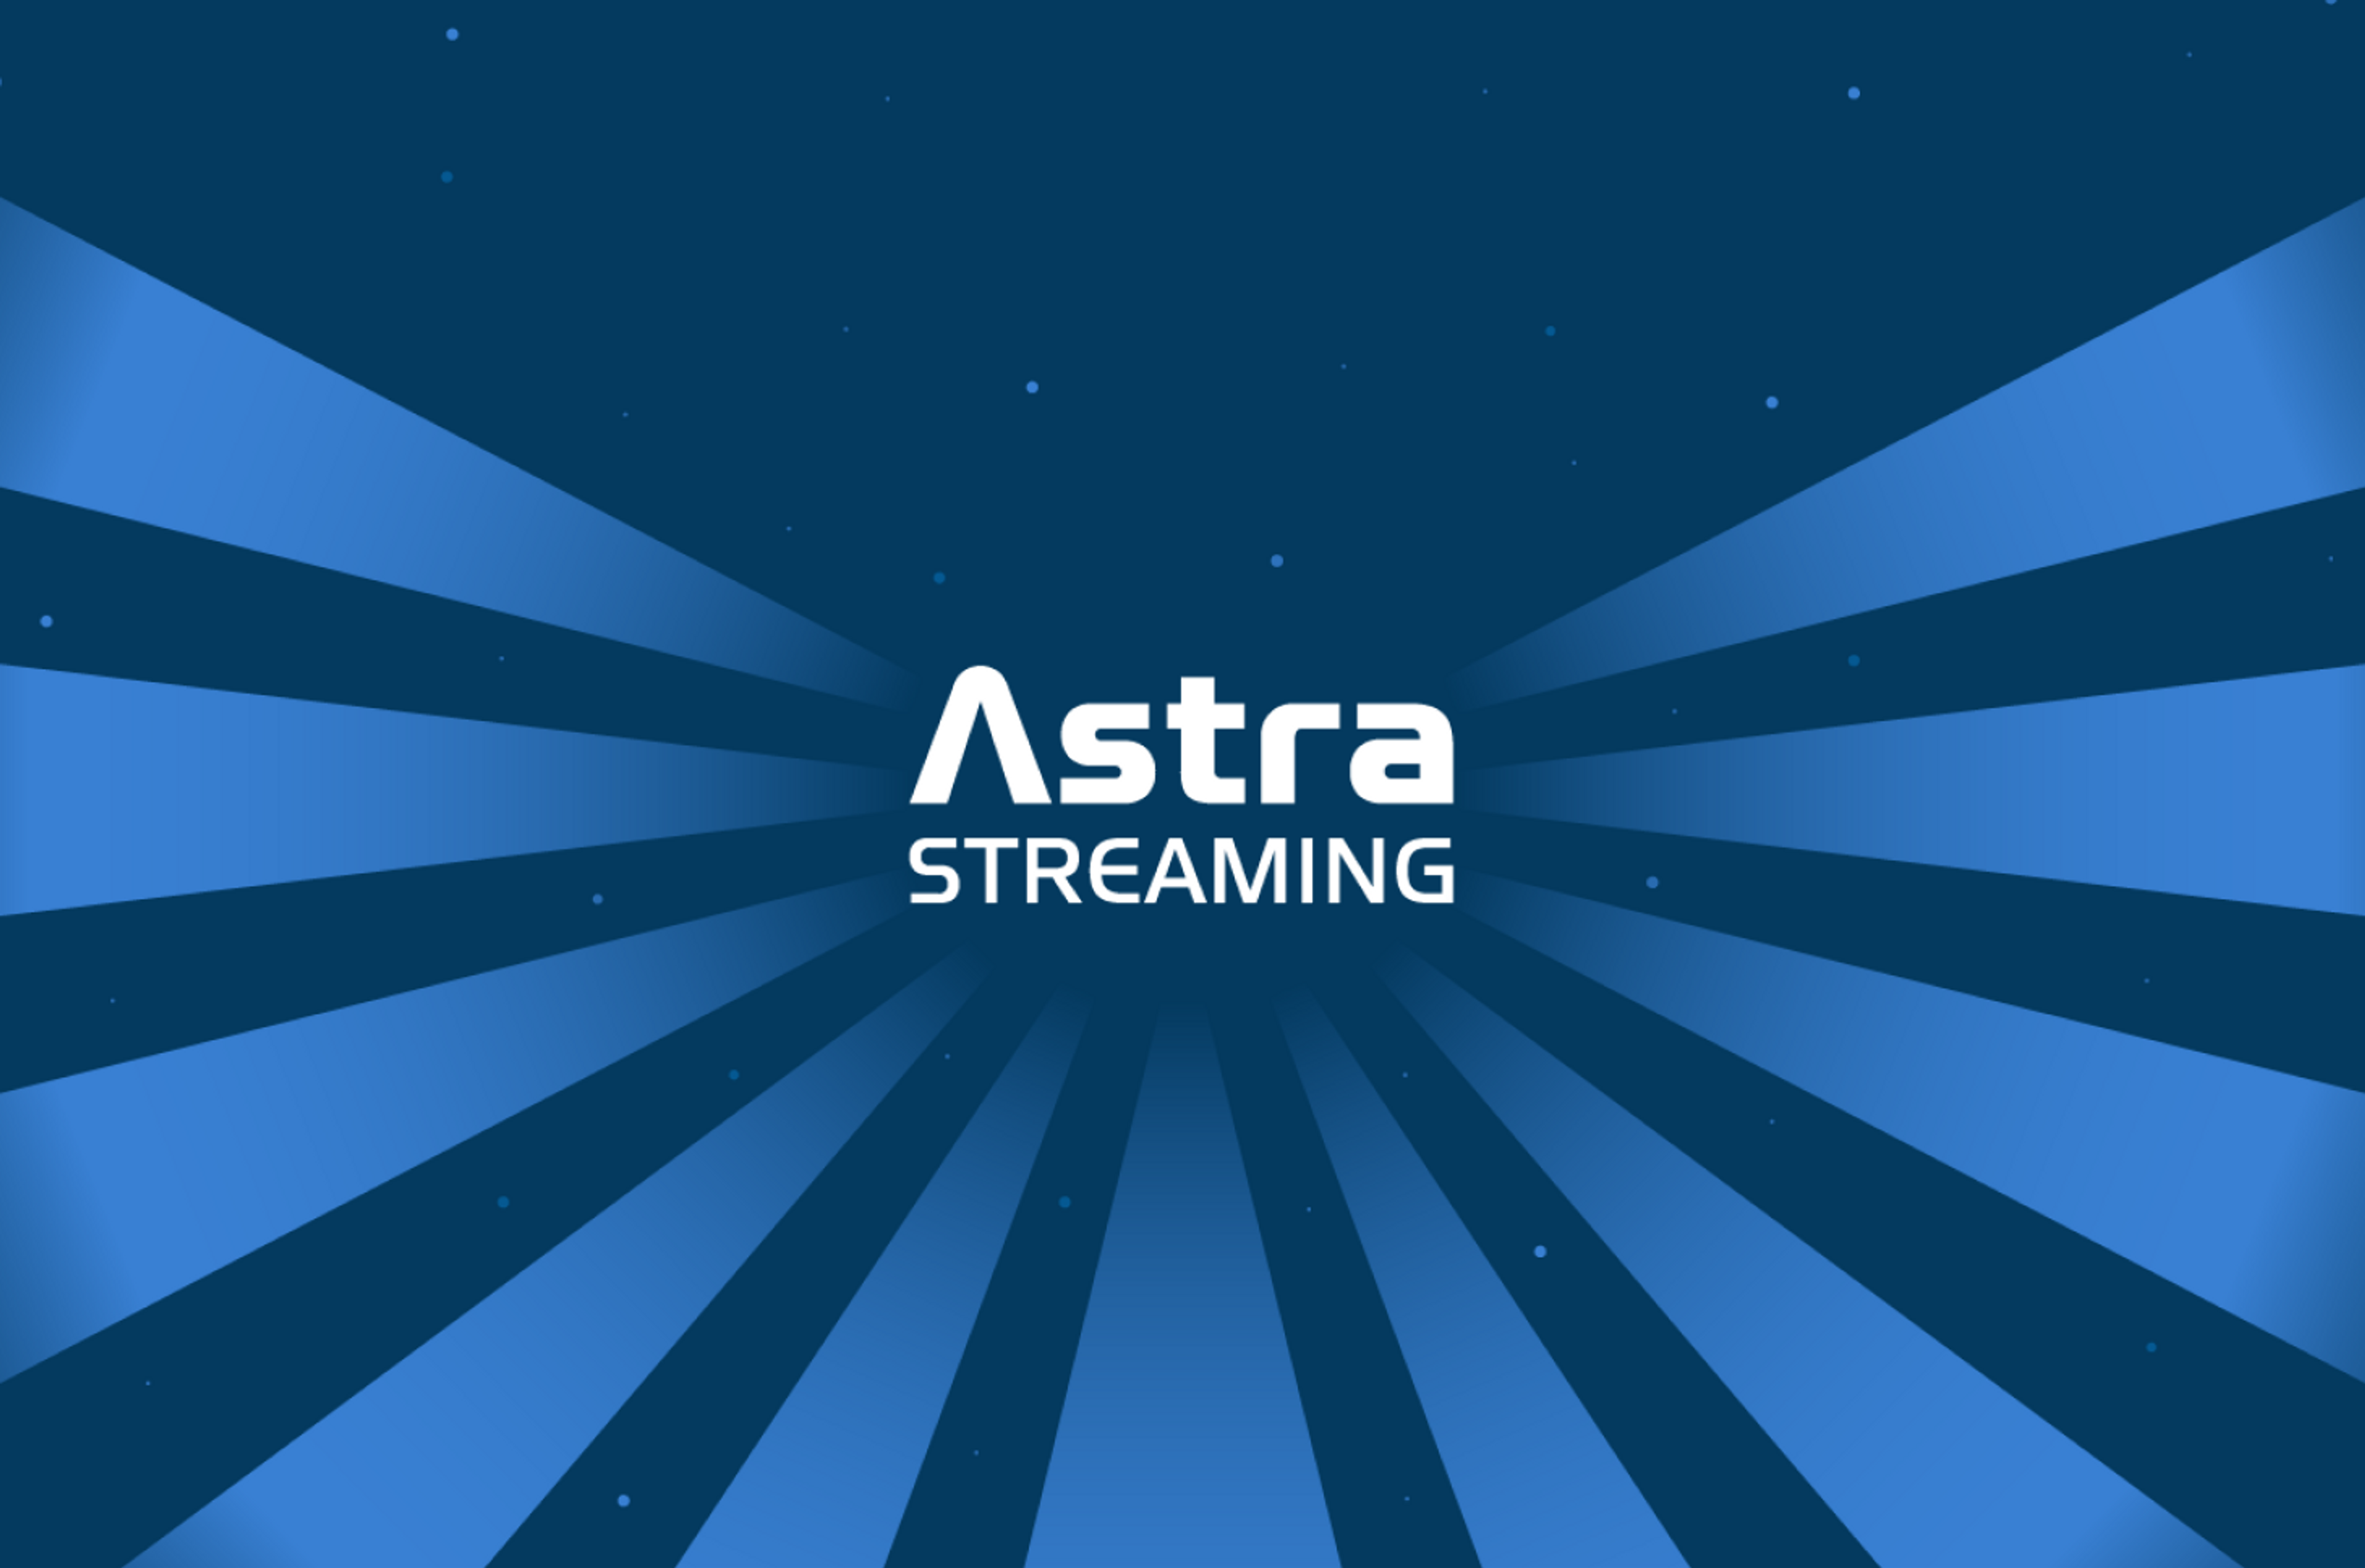 Full Stream Ahead: Astra Streaming, Powered by Apache Pulsar, is Here!